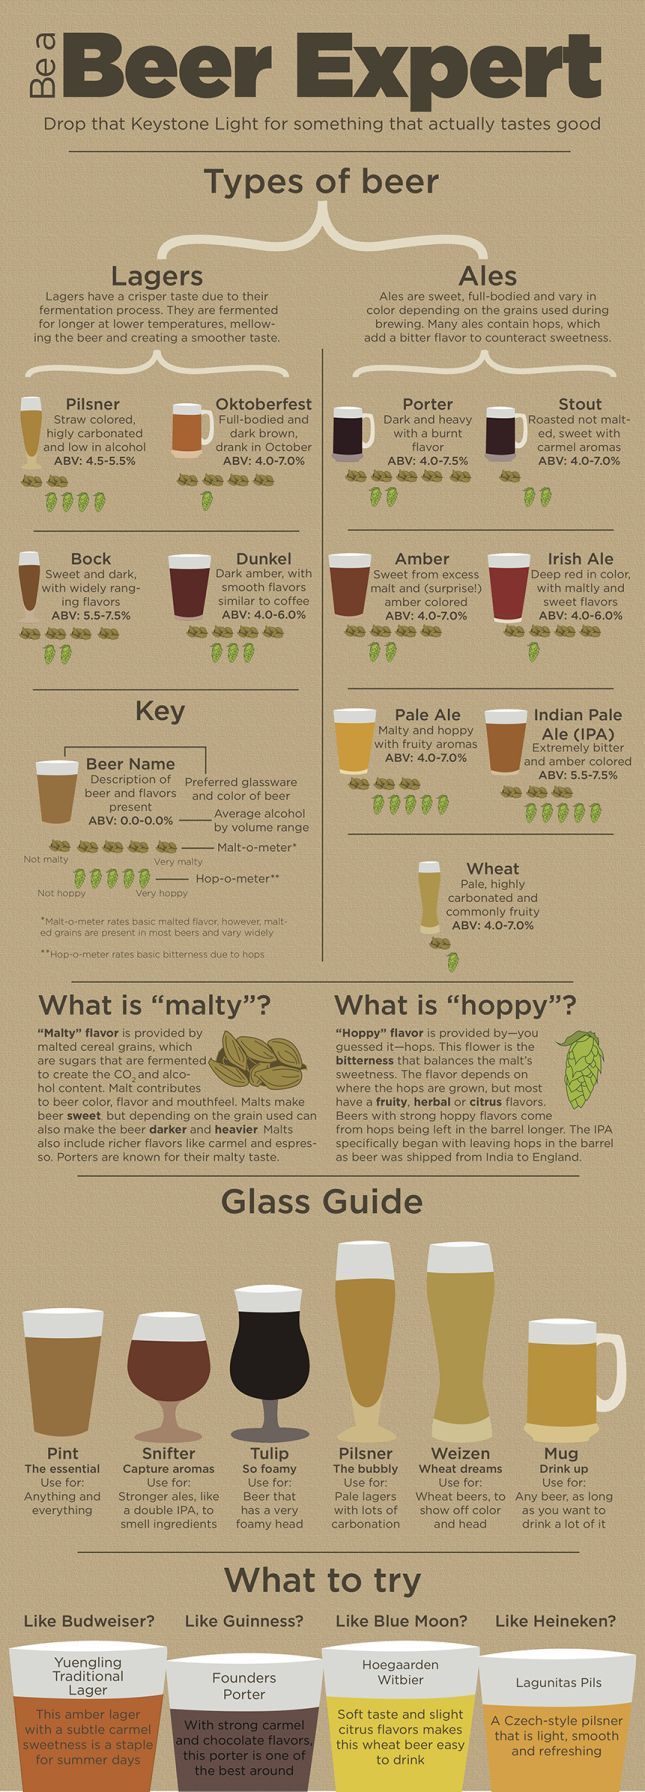 Beer Guide. I don’t really like the beer I’ve had before, maybe this will help me find one I like?